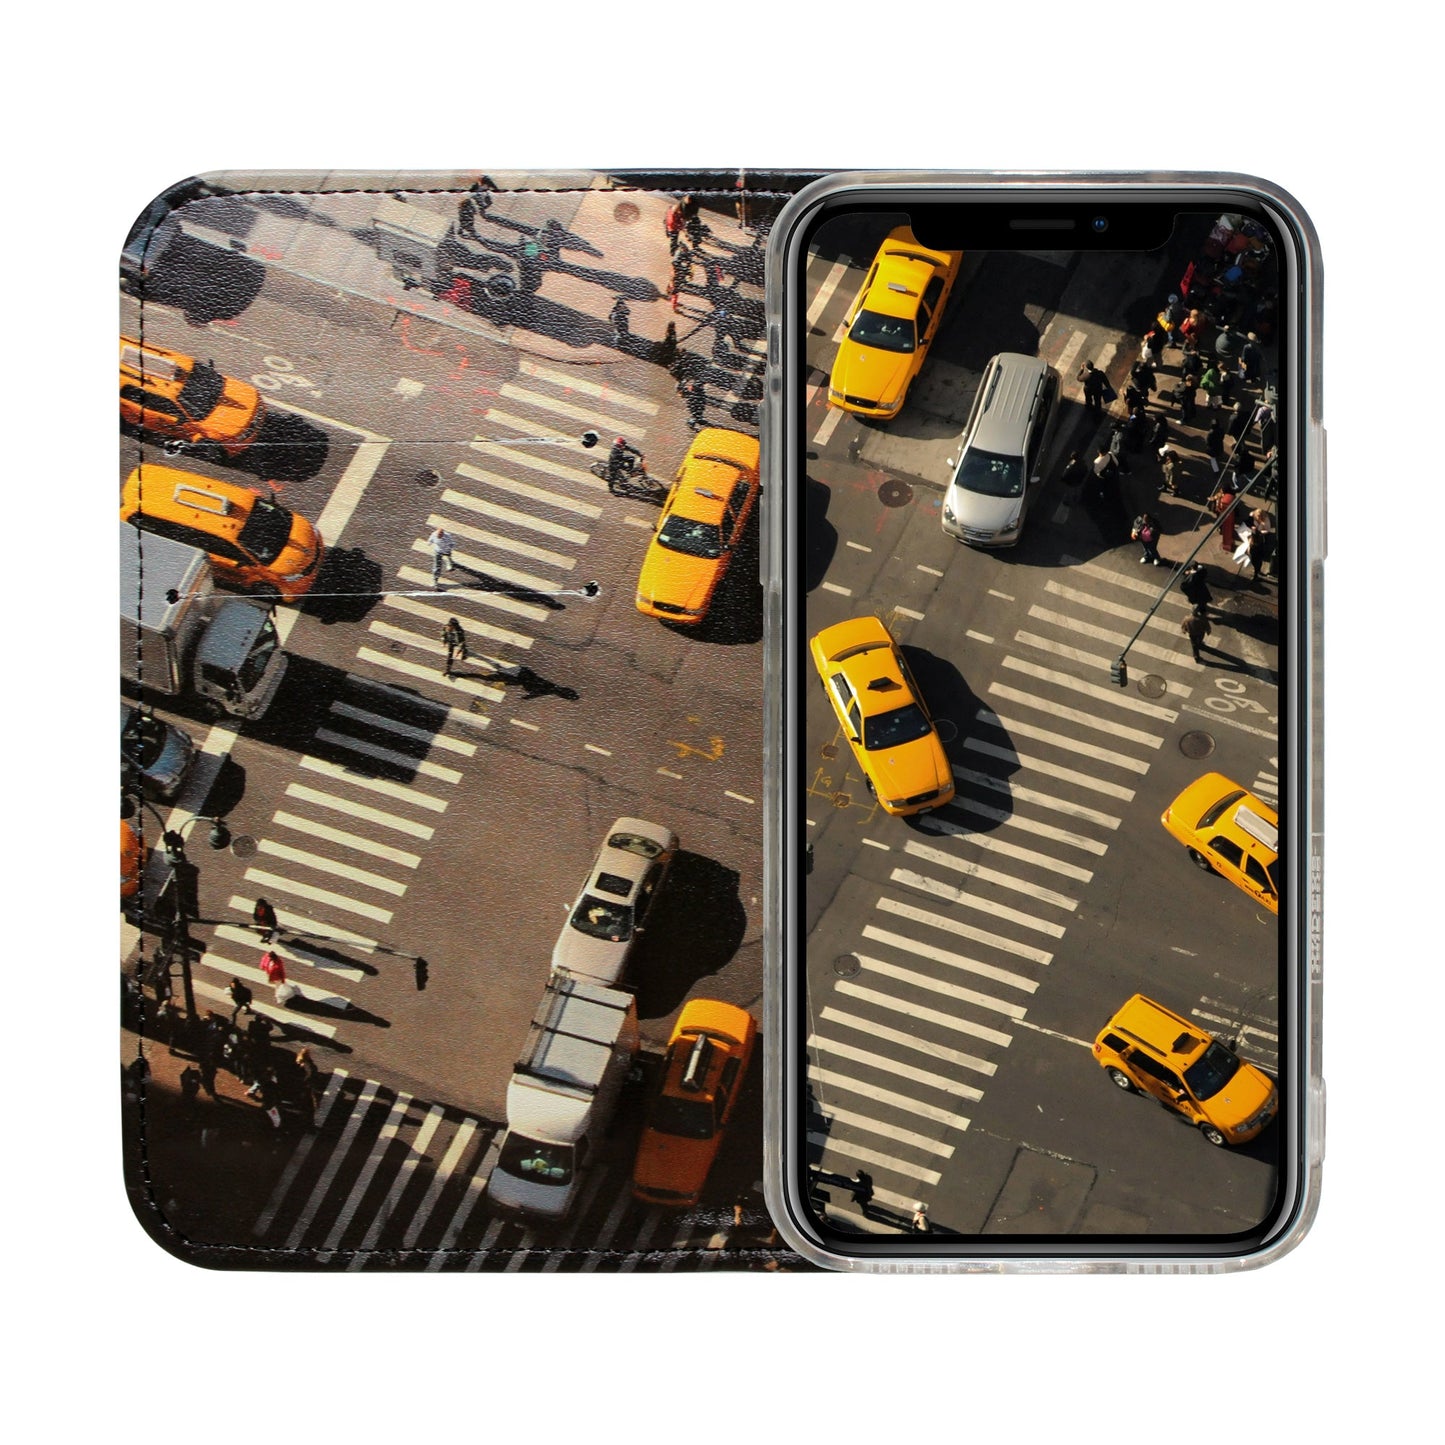 New York City Panorama Case for iPhone X/XS